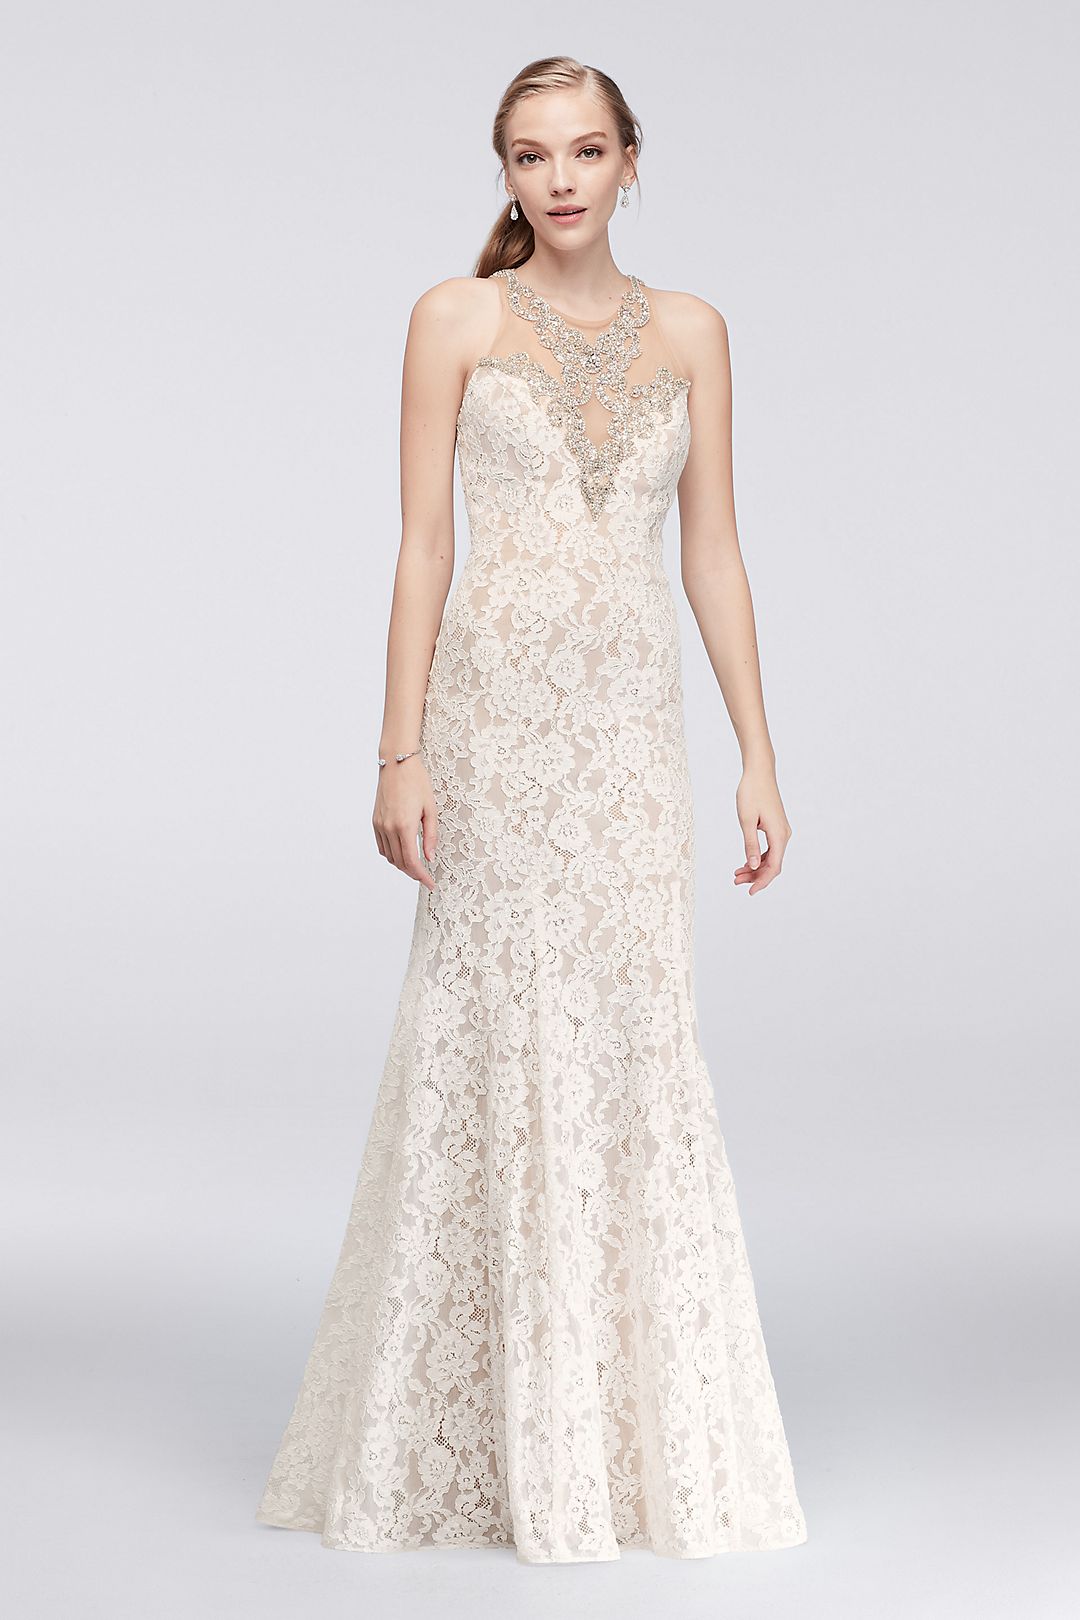 Allover Lace Mermaid Dress with Crystal Neckline Image 1